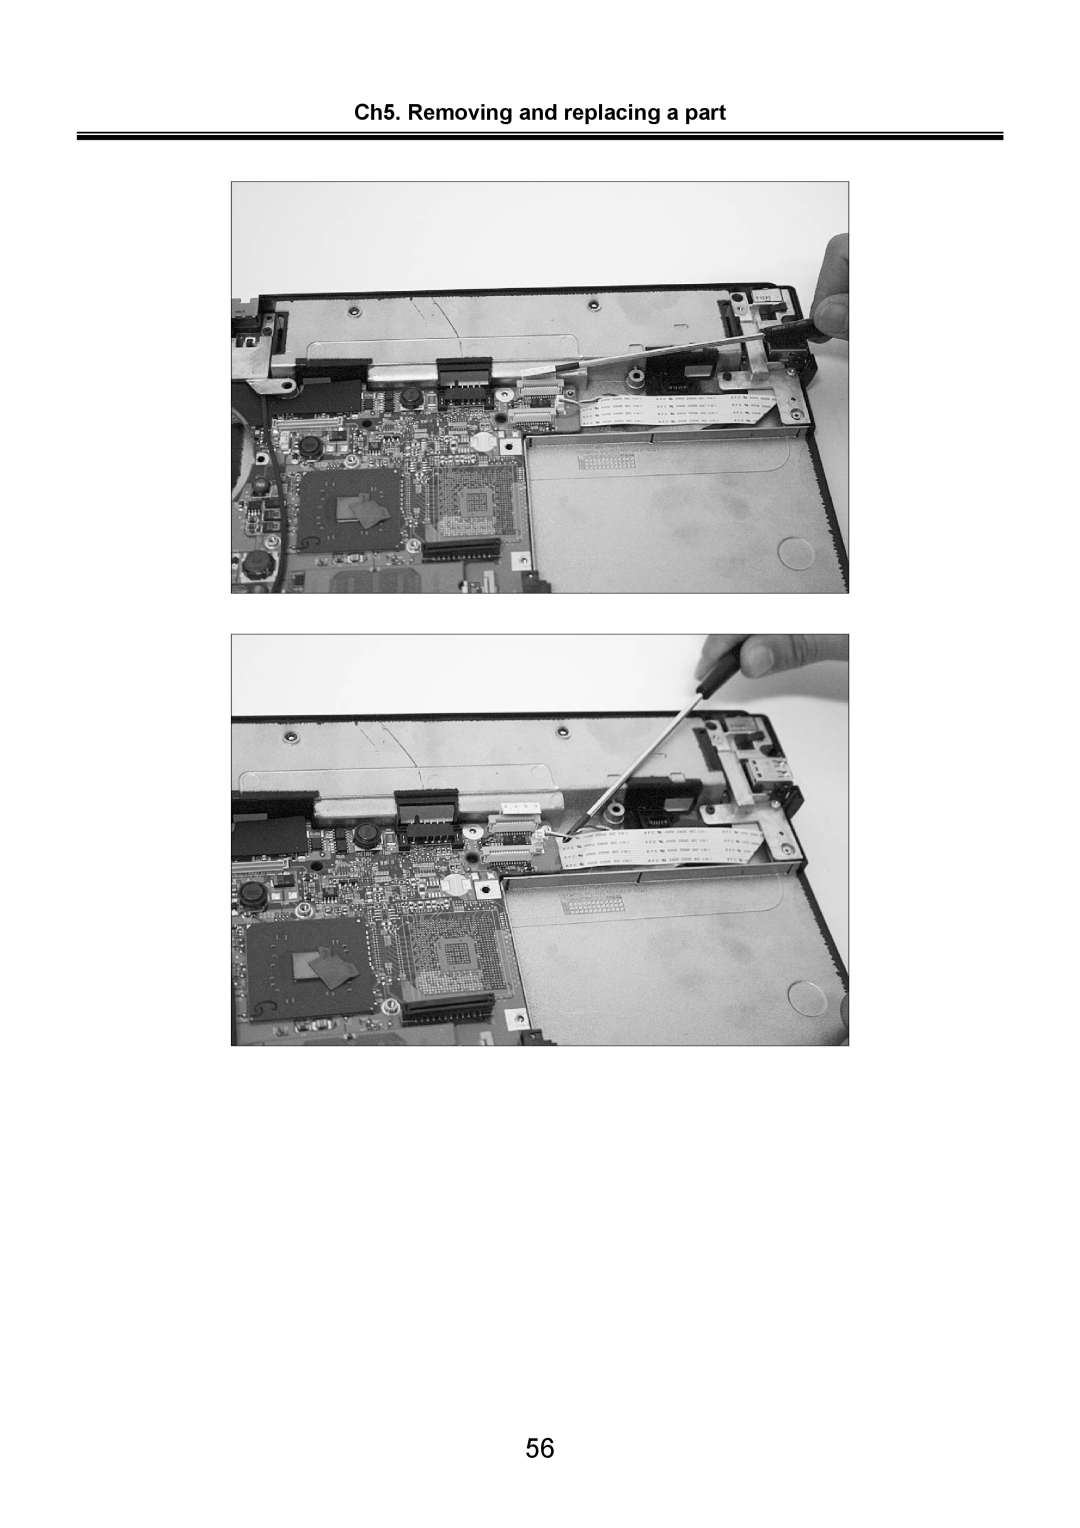 LG Electronics LS70 service manual Ch5. Removing and replacing a part 